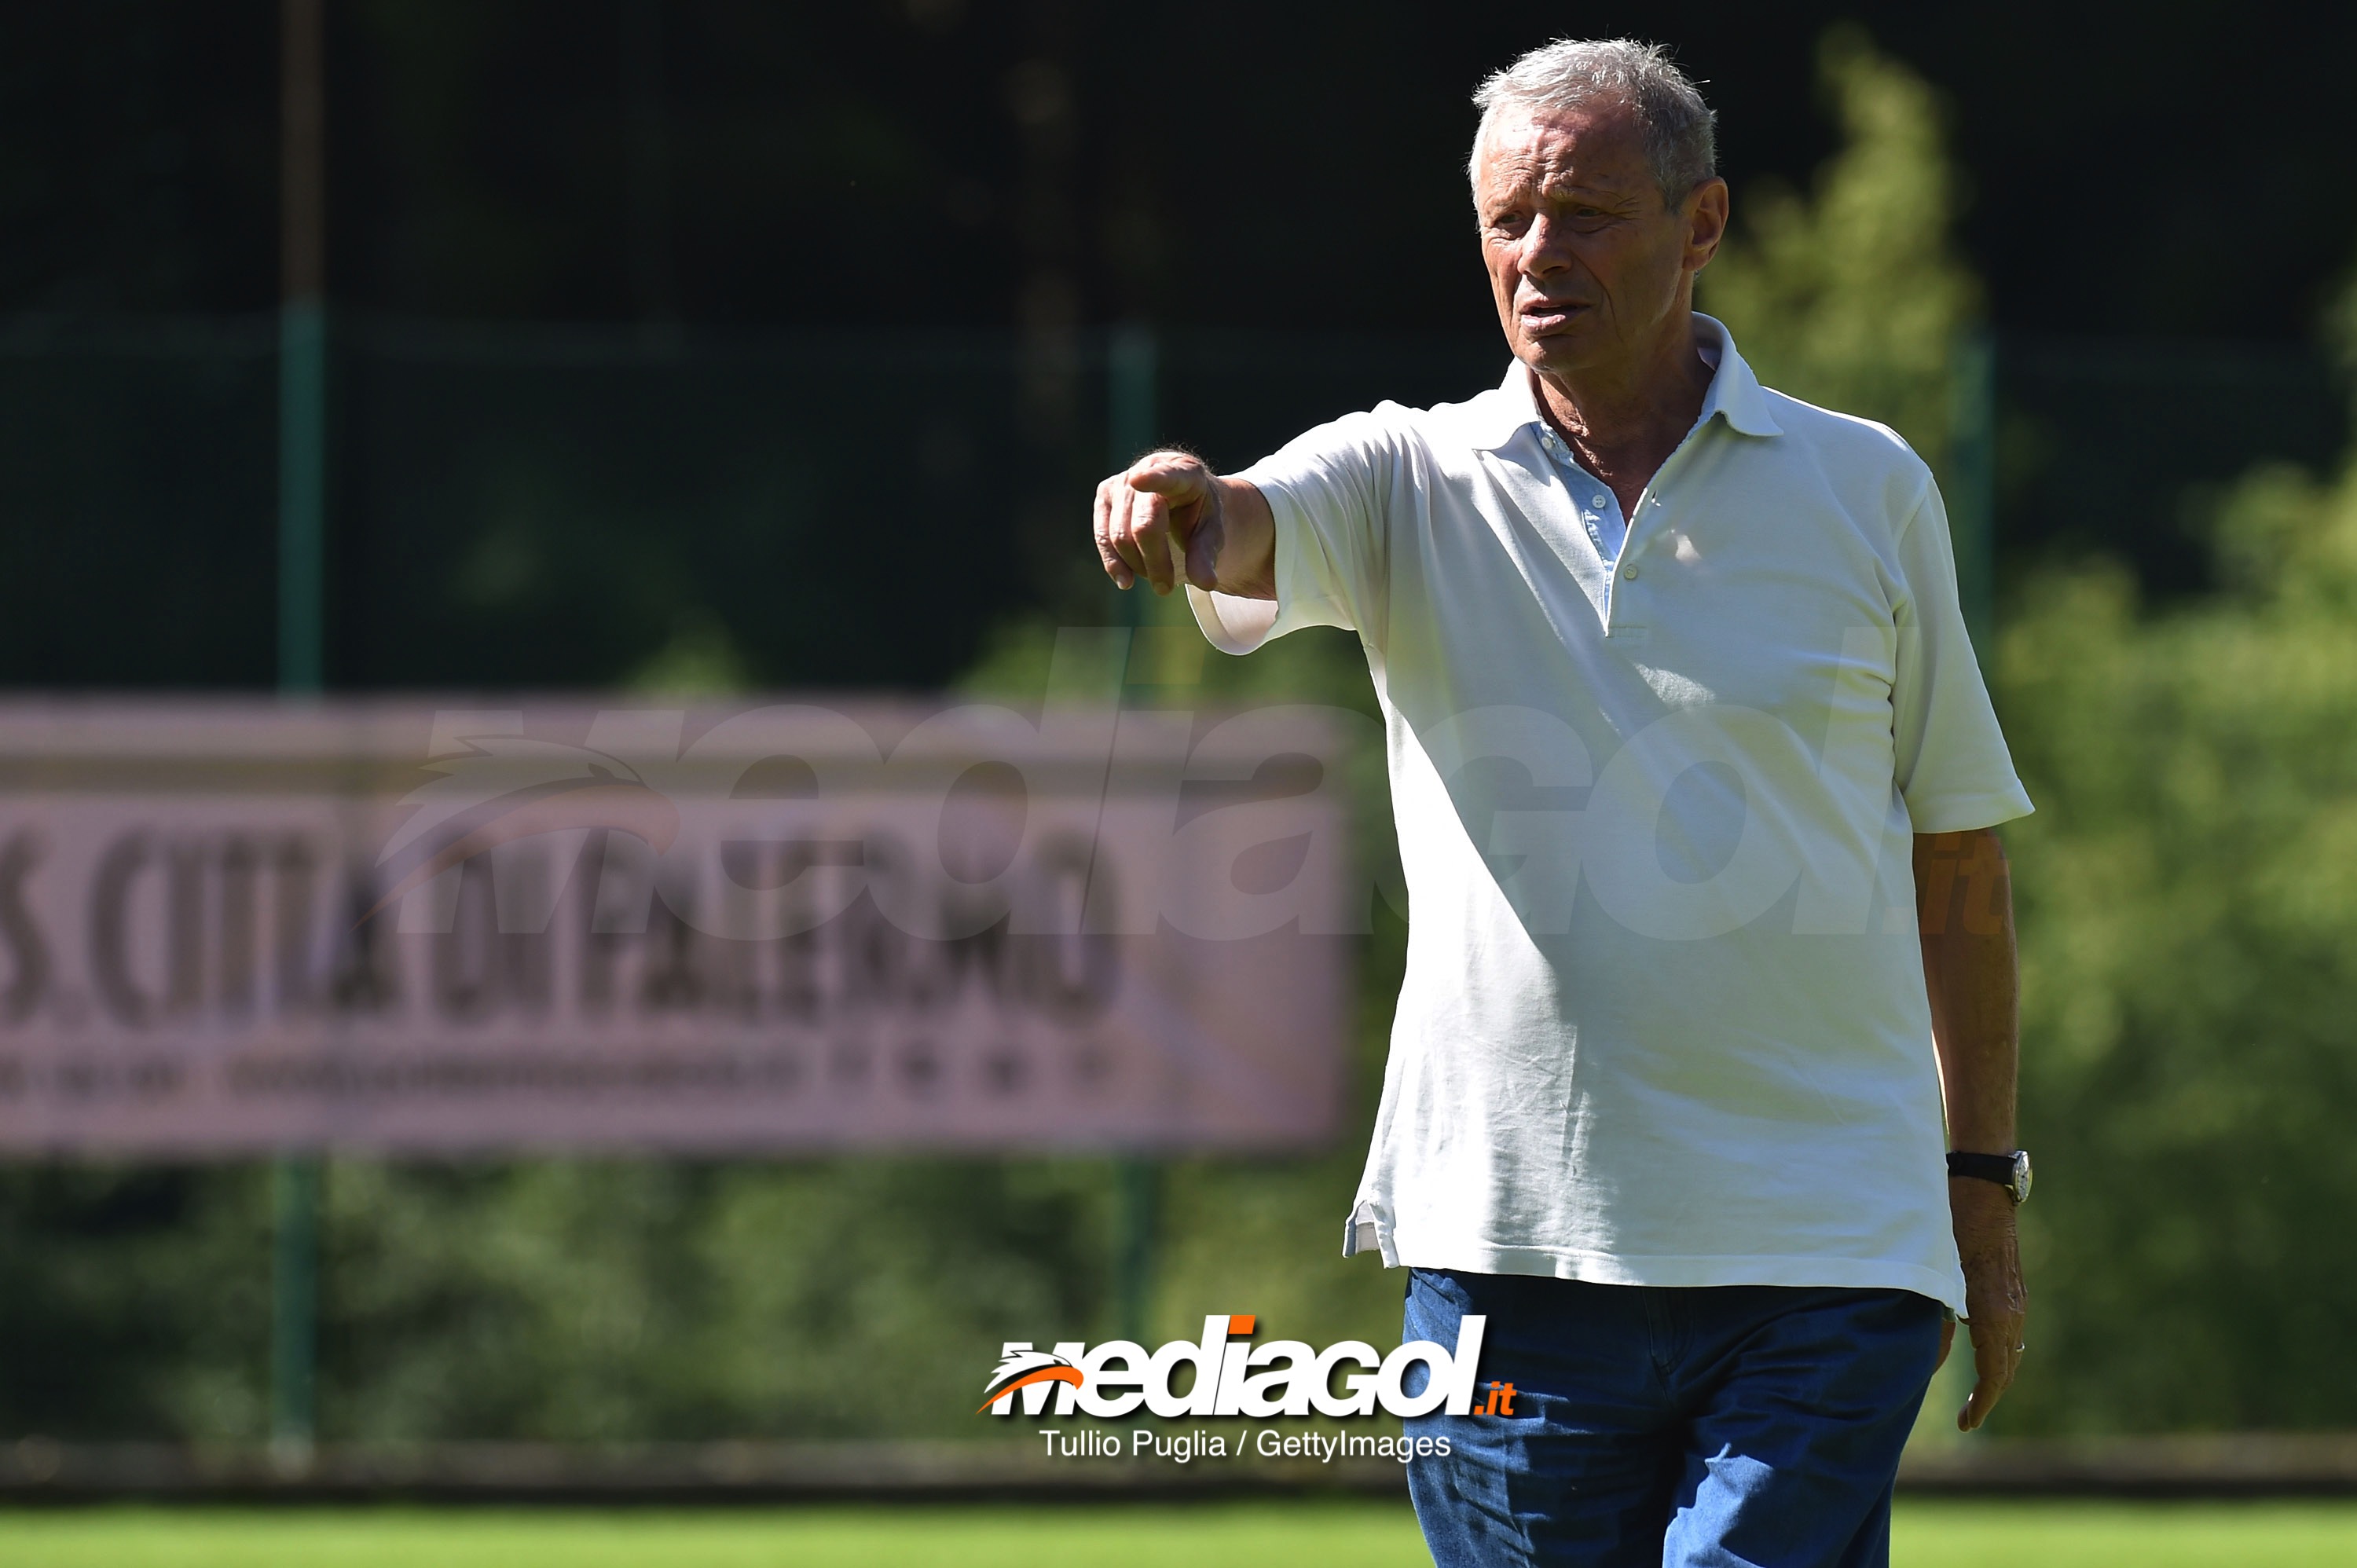 BELLUNO, ITALY - JULY 25:  Palermo owner Maurizio Zamparini looks on during a training session at the US Citta' di Palermo training camp on July 25, 2018 in Belluno, Italy.  (Photo by Tullio M. Puglia/Getty Images)